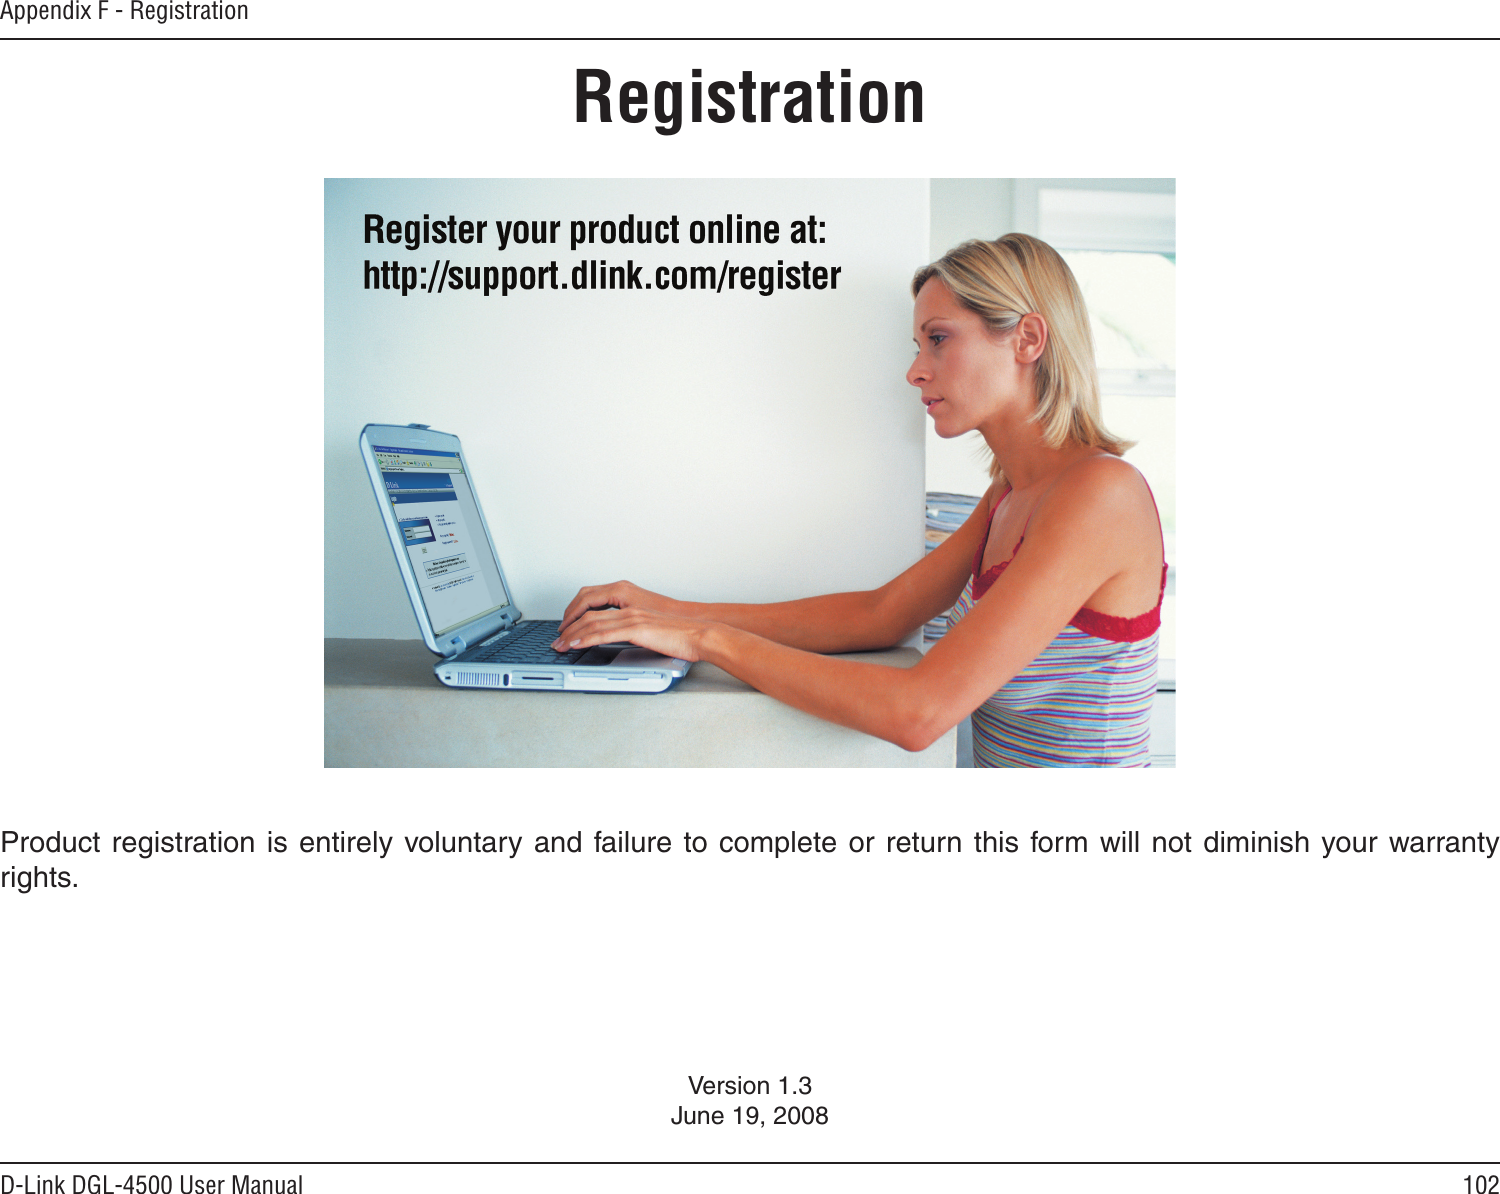 102D-Link DGL-4500 User ManualAppendix F - RegistrationVersion 1.3June 19, 2008Product registration is entirely  voluntary and failure to complete or return this form will not diminish your warranty rights.Registration